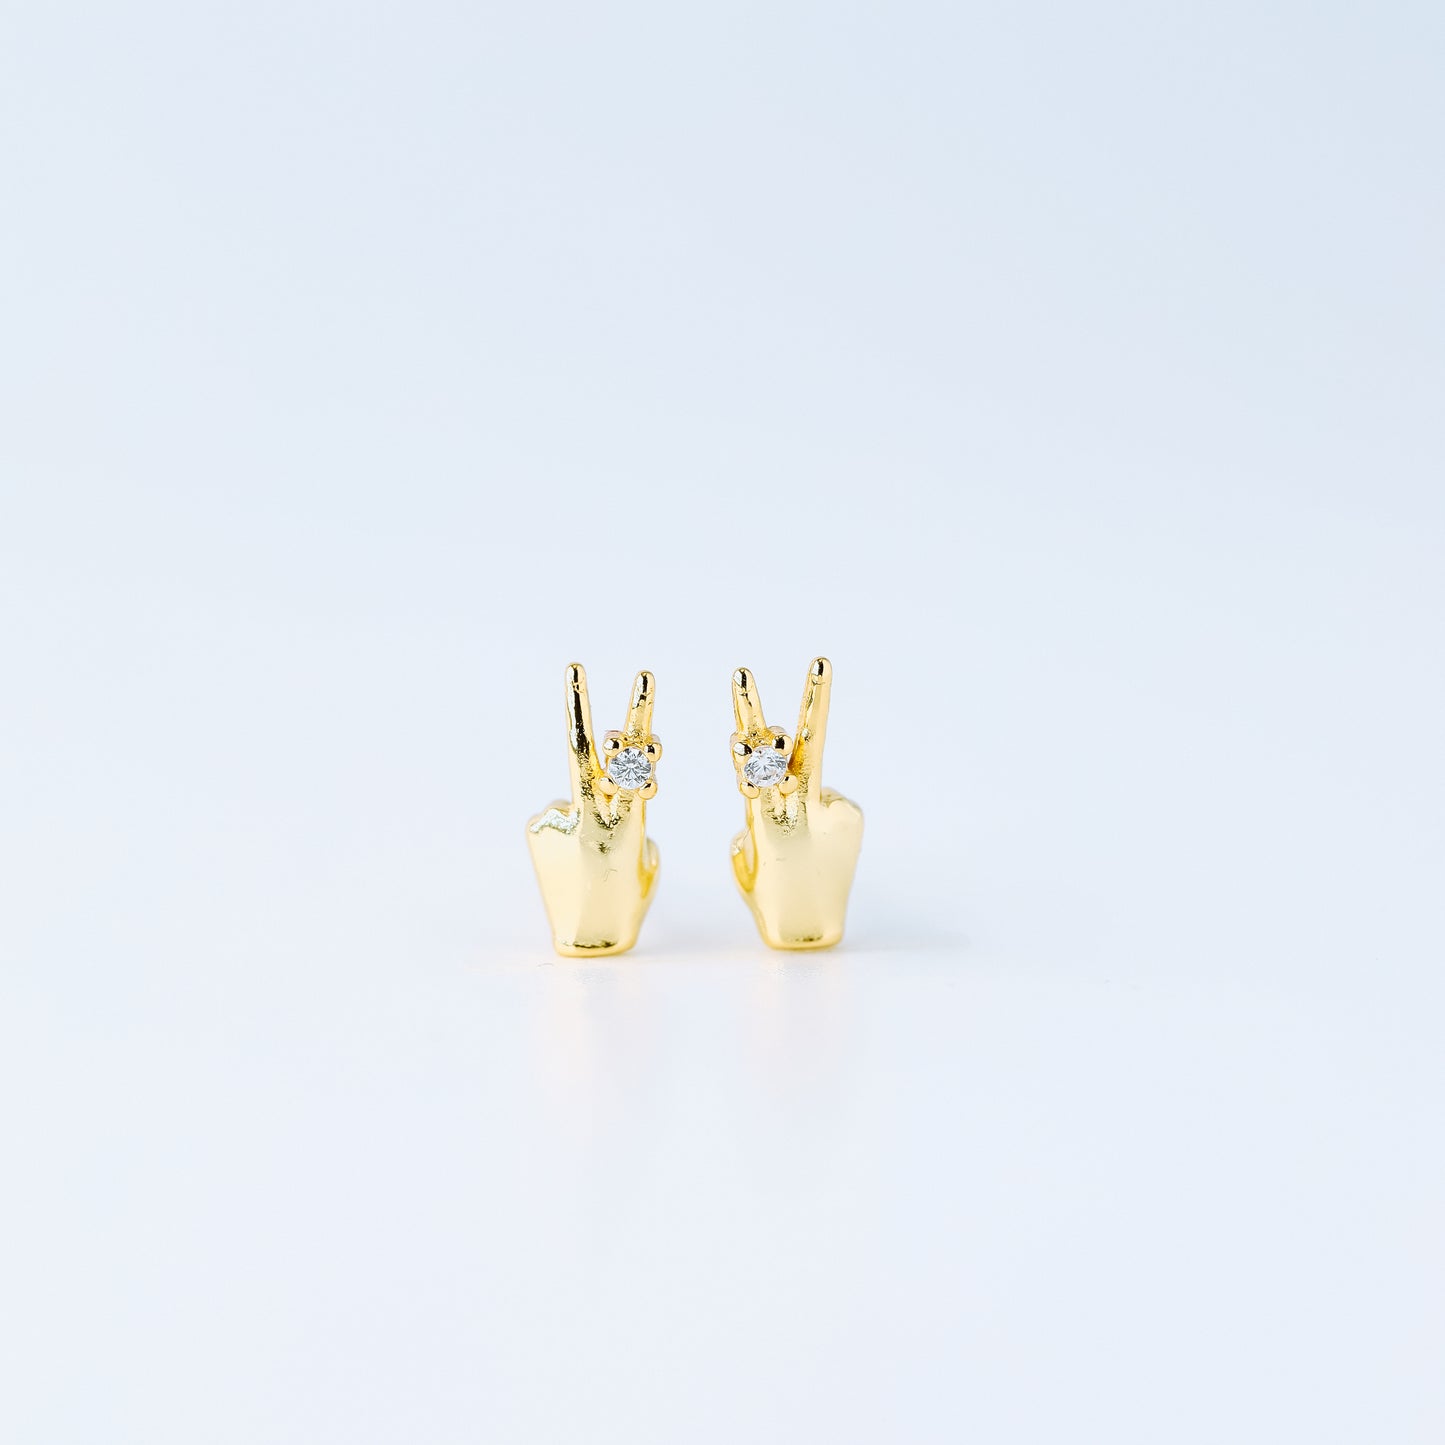 Victory Hand Earrings, V Earrings, Fighting, Peace Sign Earrings, Peace Fingers, Gift for Her, Sold Individually, BYSDMJEWELS